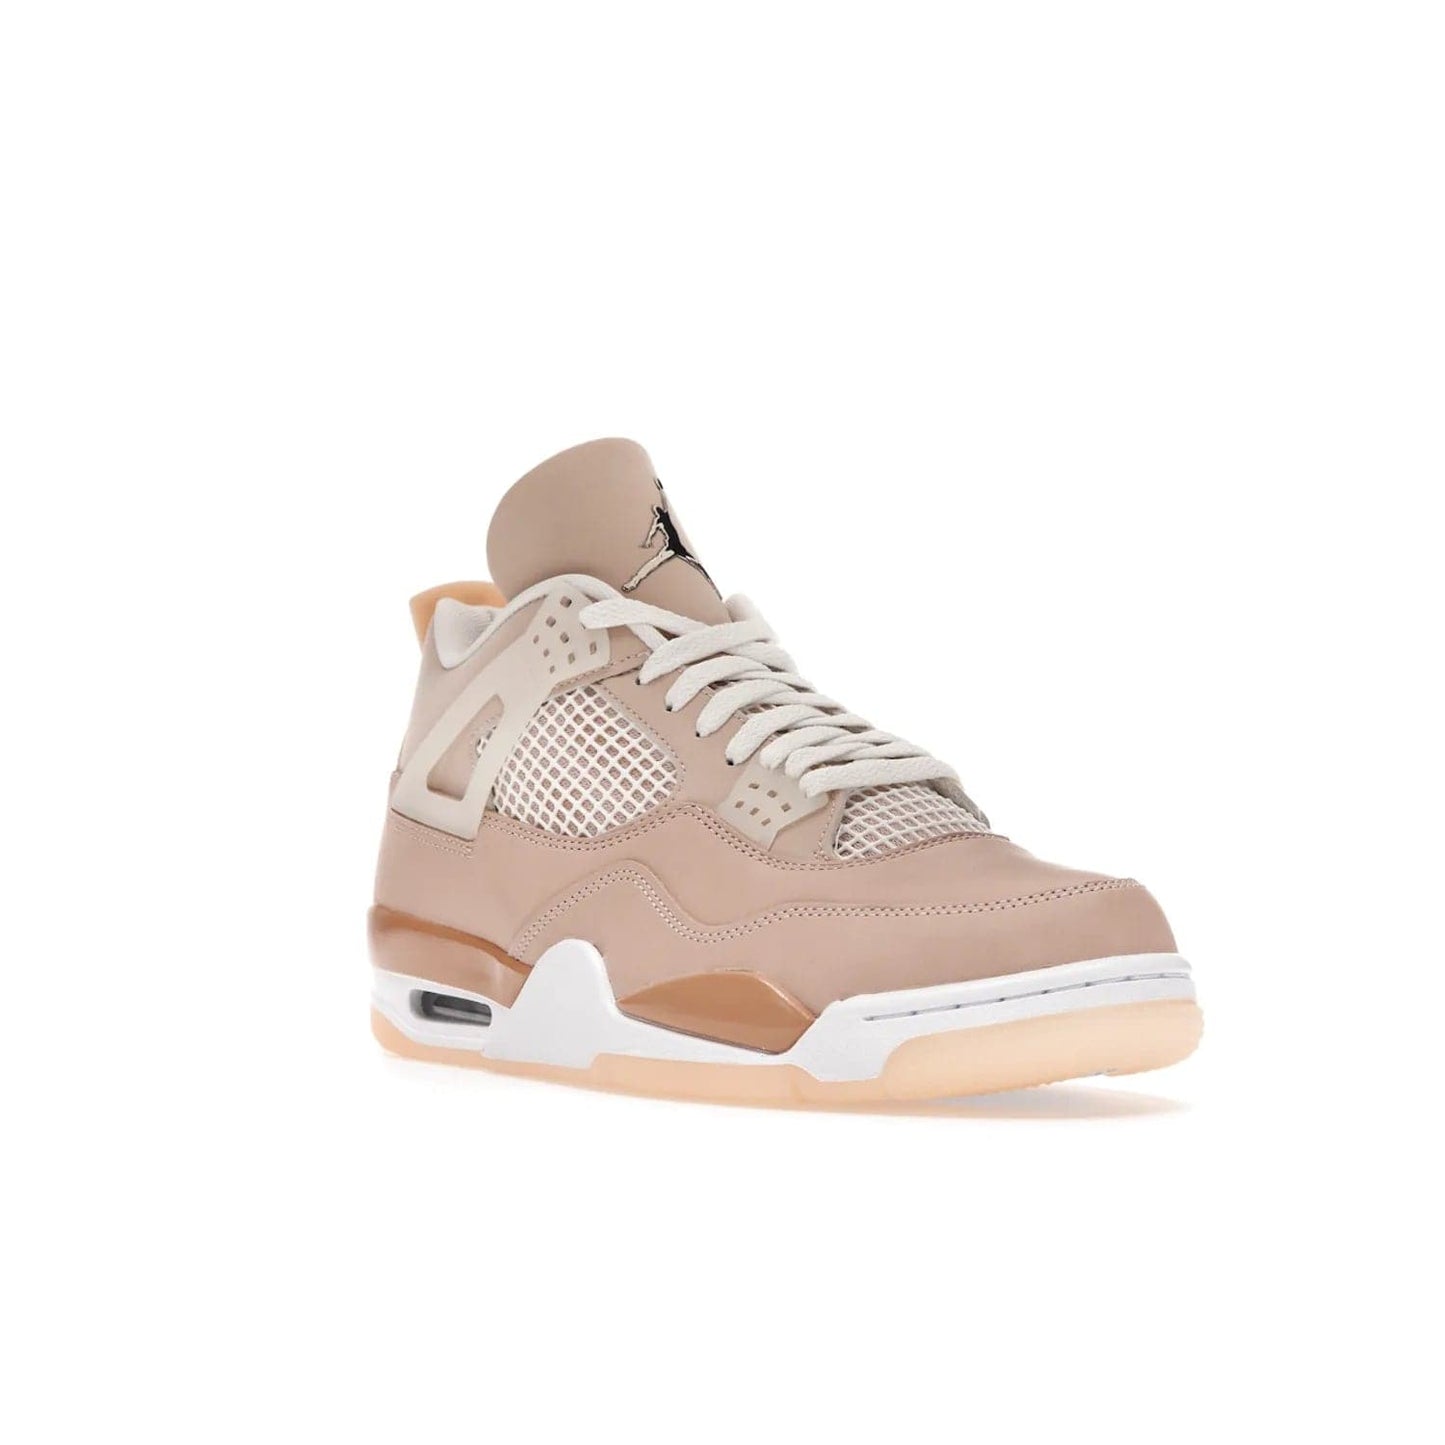 Jordan 4 Retro Shimmer (Women's) - Image 6 - Only at www.BallersClubKickz.com - Air Jordan 4 Shimmer (W): A women's-exclusive design with a buttery beige upper and Silver/Orange Bronze details. Durabuck and metallic Jumpman branding elevate the iconic silhouette. Shop now.